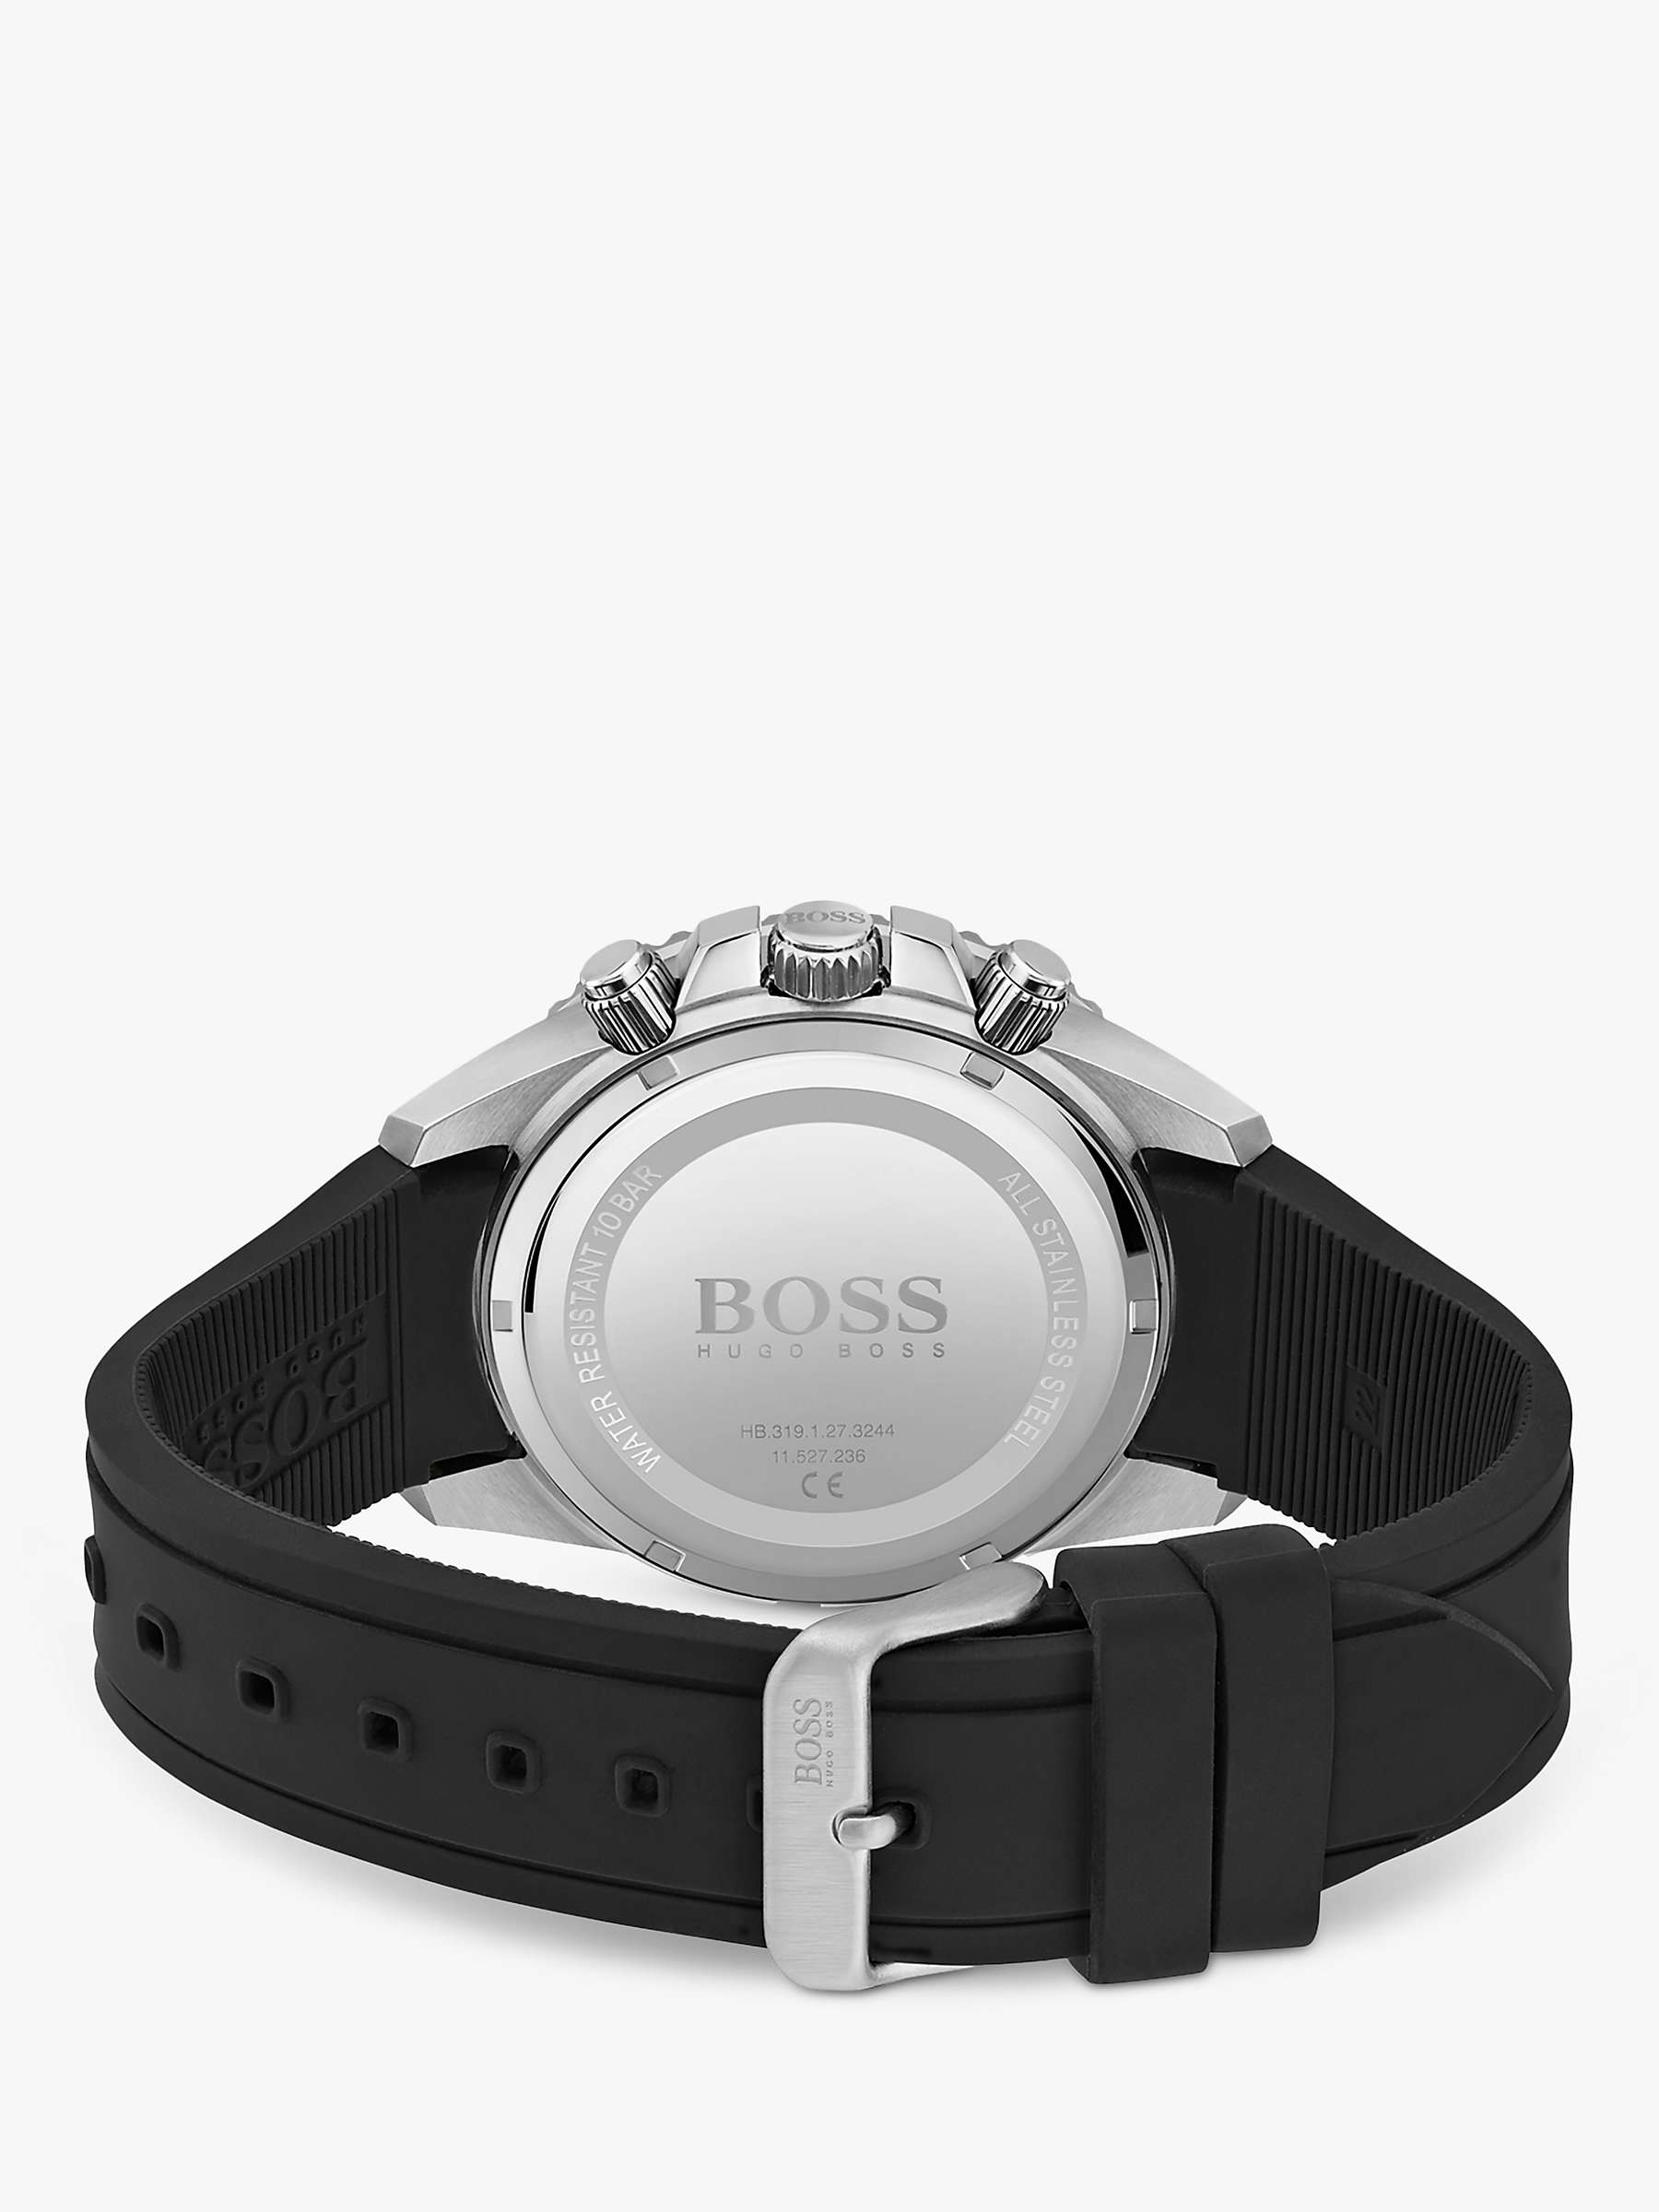 Buy BOSS Men's Admiral Chronograph Date Rubber Strap Watch, Black/Silver 1513912 Online at johnlewis.com